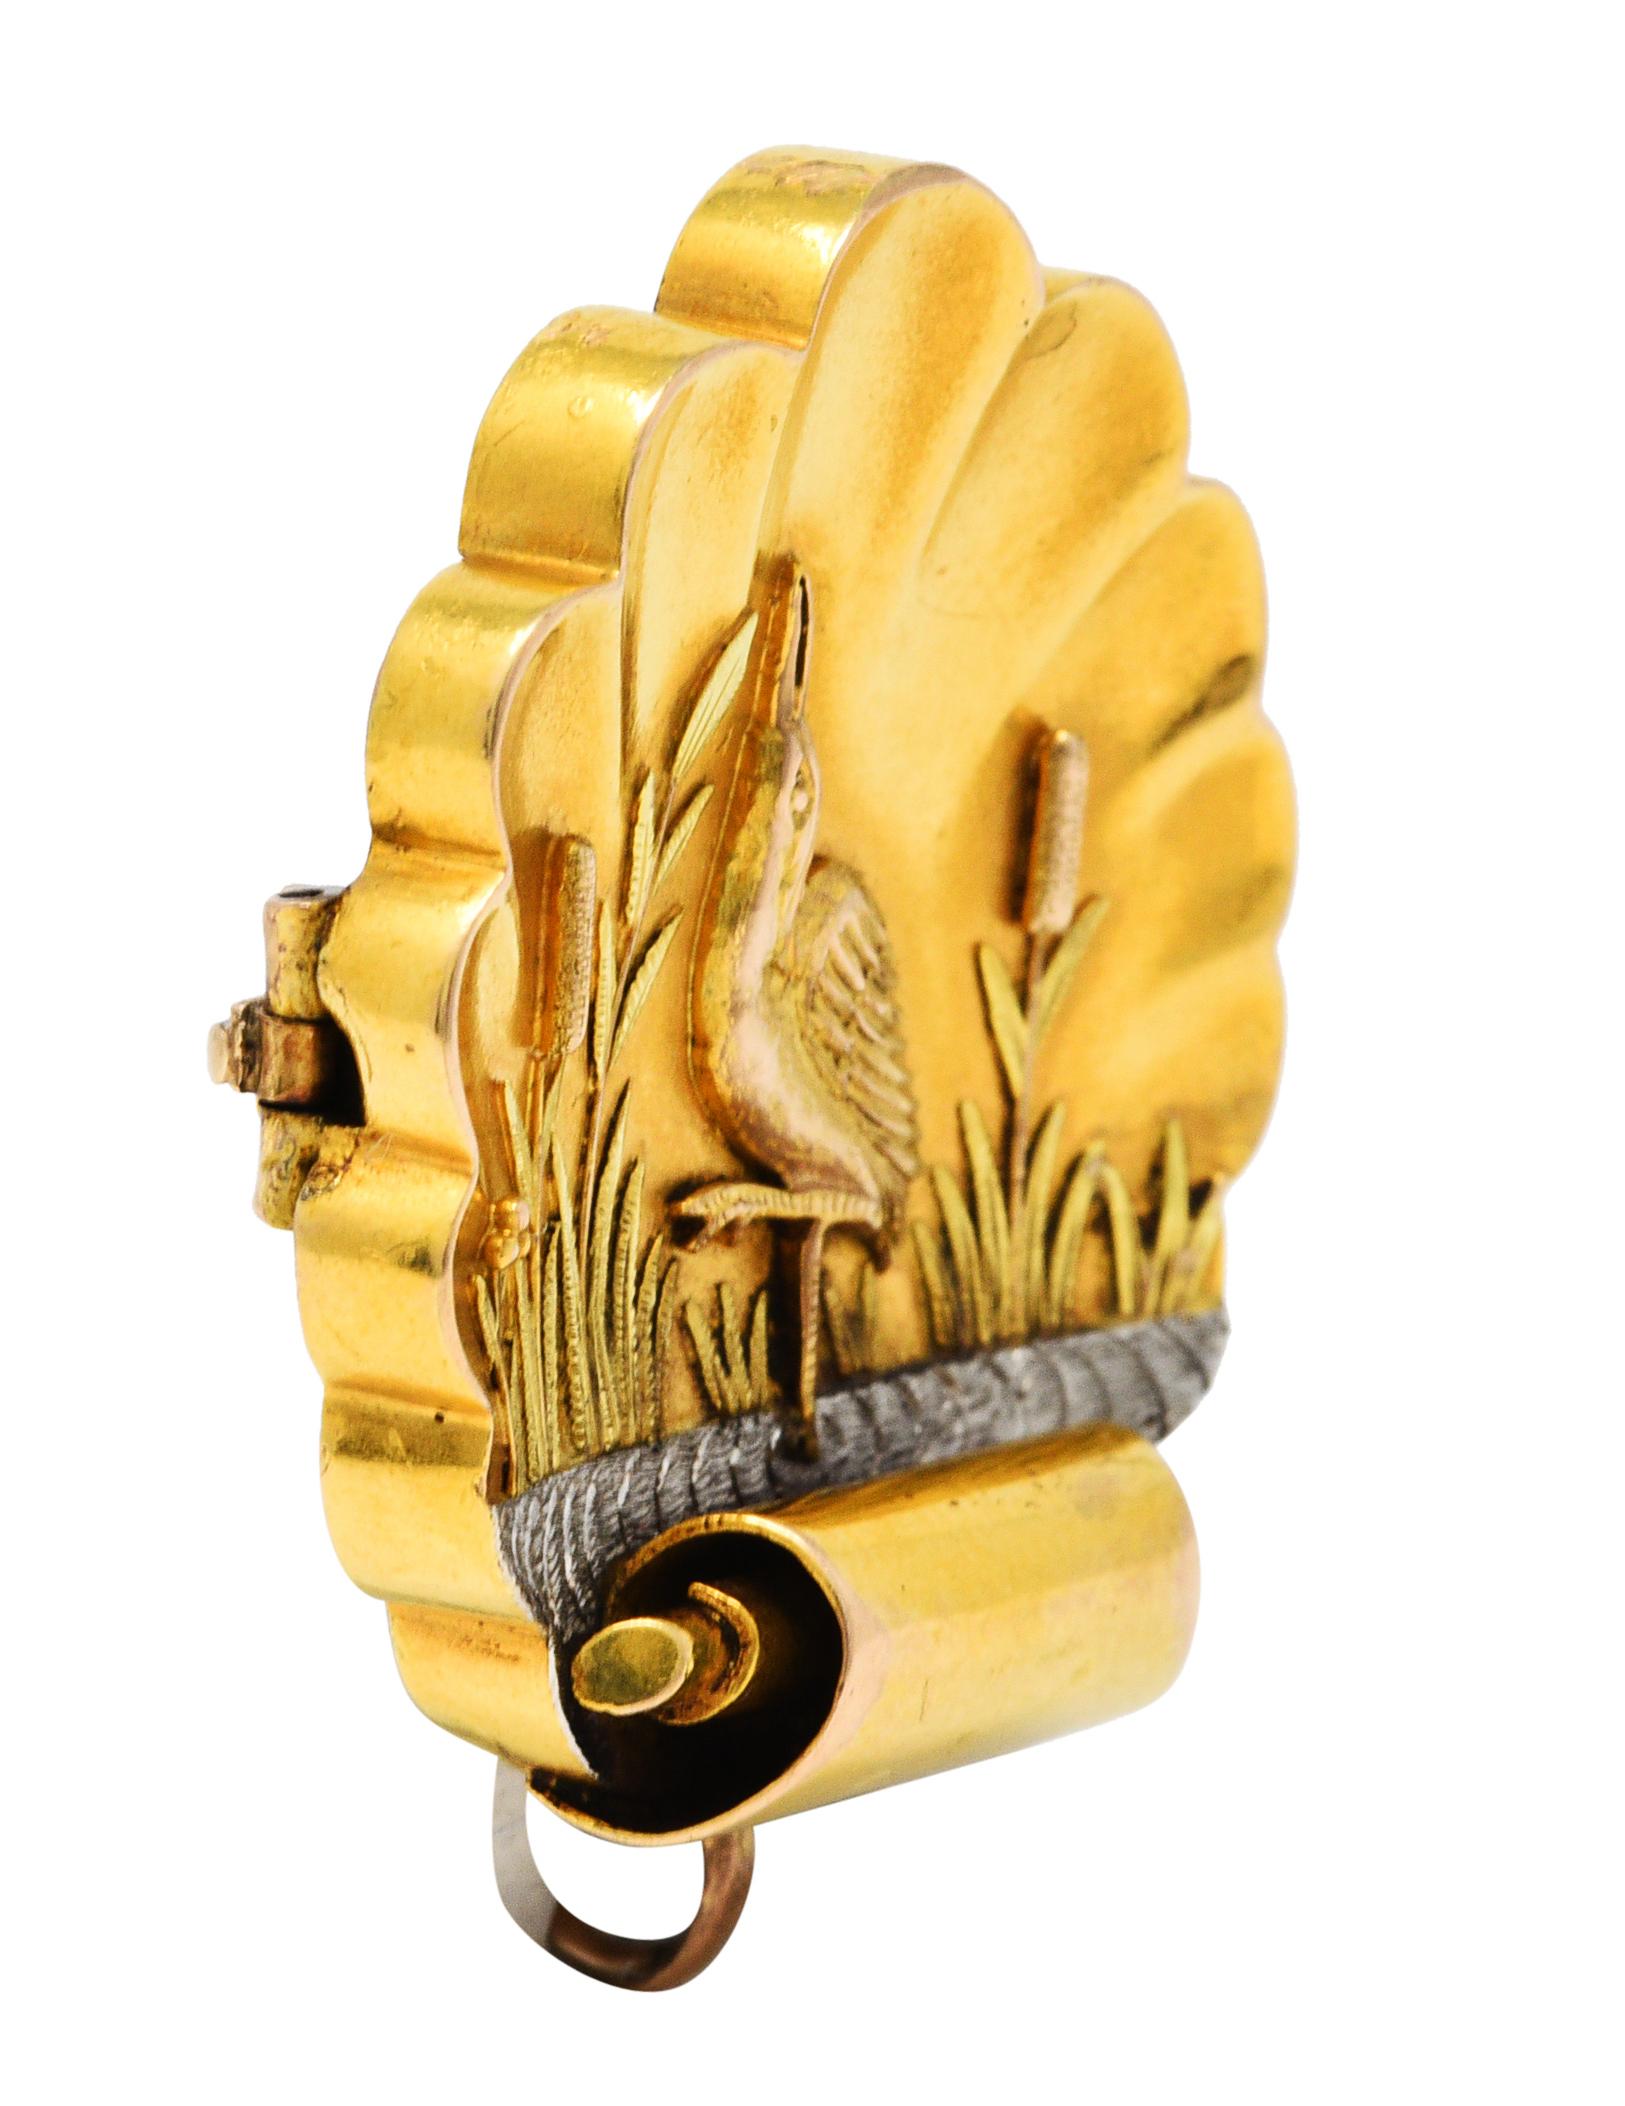 Designed as a scalloped shell with a scrolled volute base

Depicting a serene scene of a heron perching on one leg amidst white gold waters

Surrounded by green gold foliate and rose gold cattails

Completed by a pin stem with closure and a watch